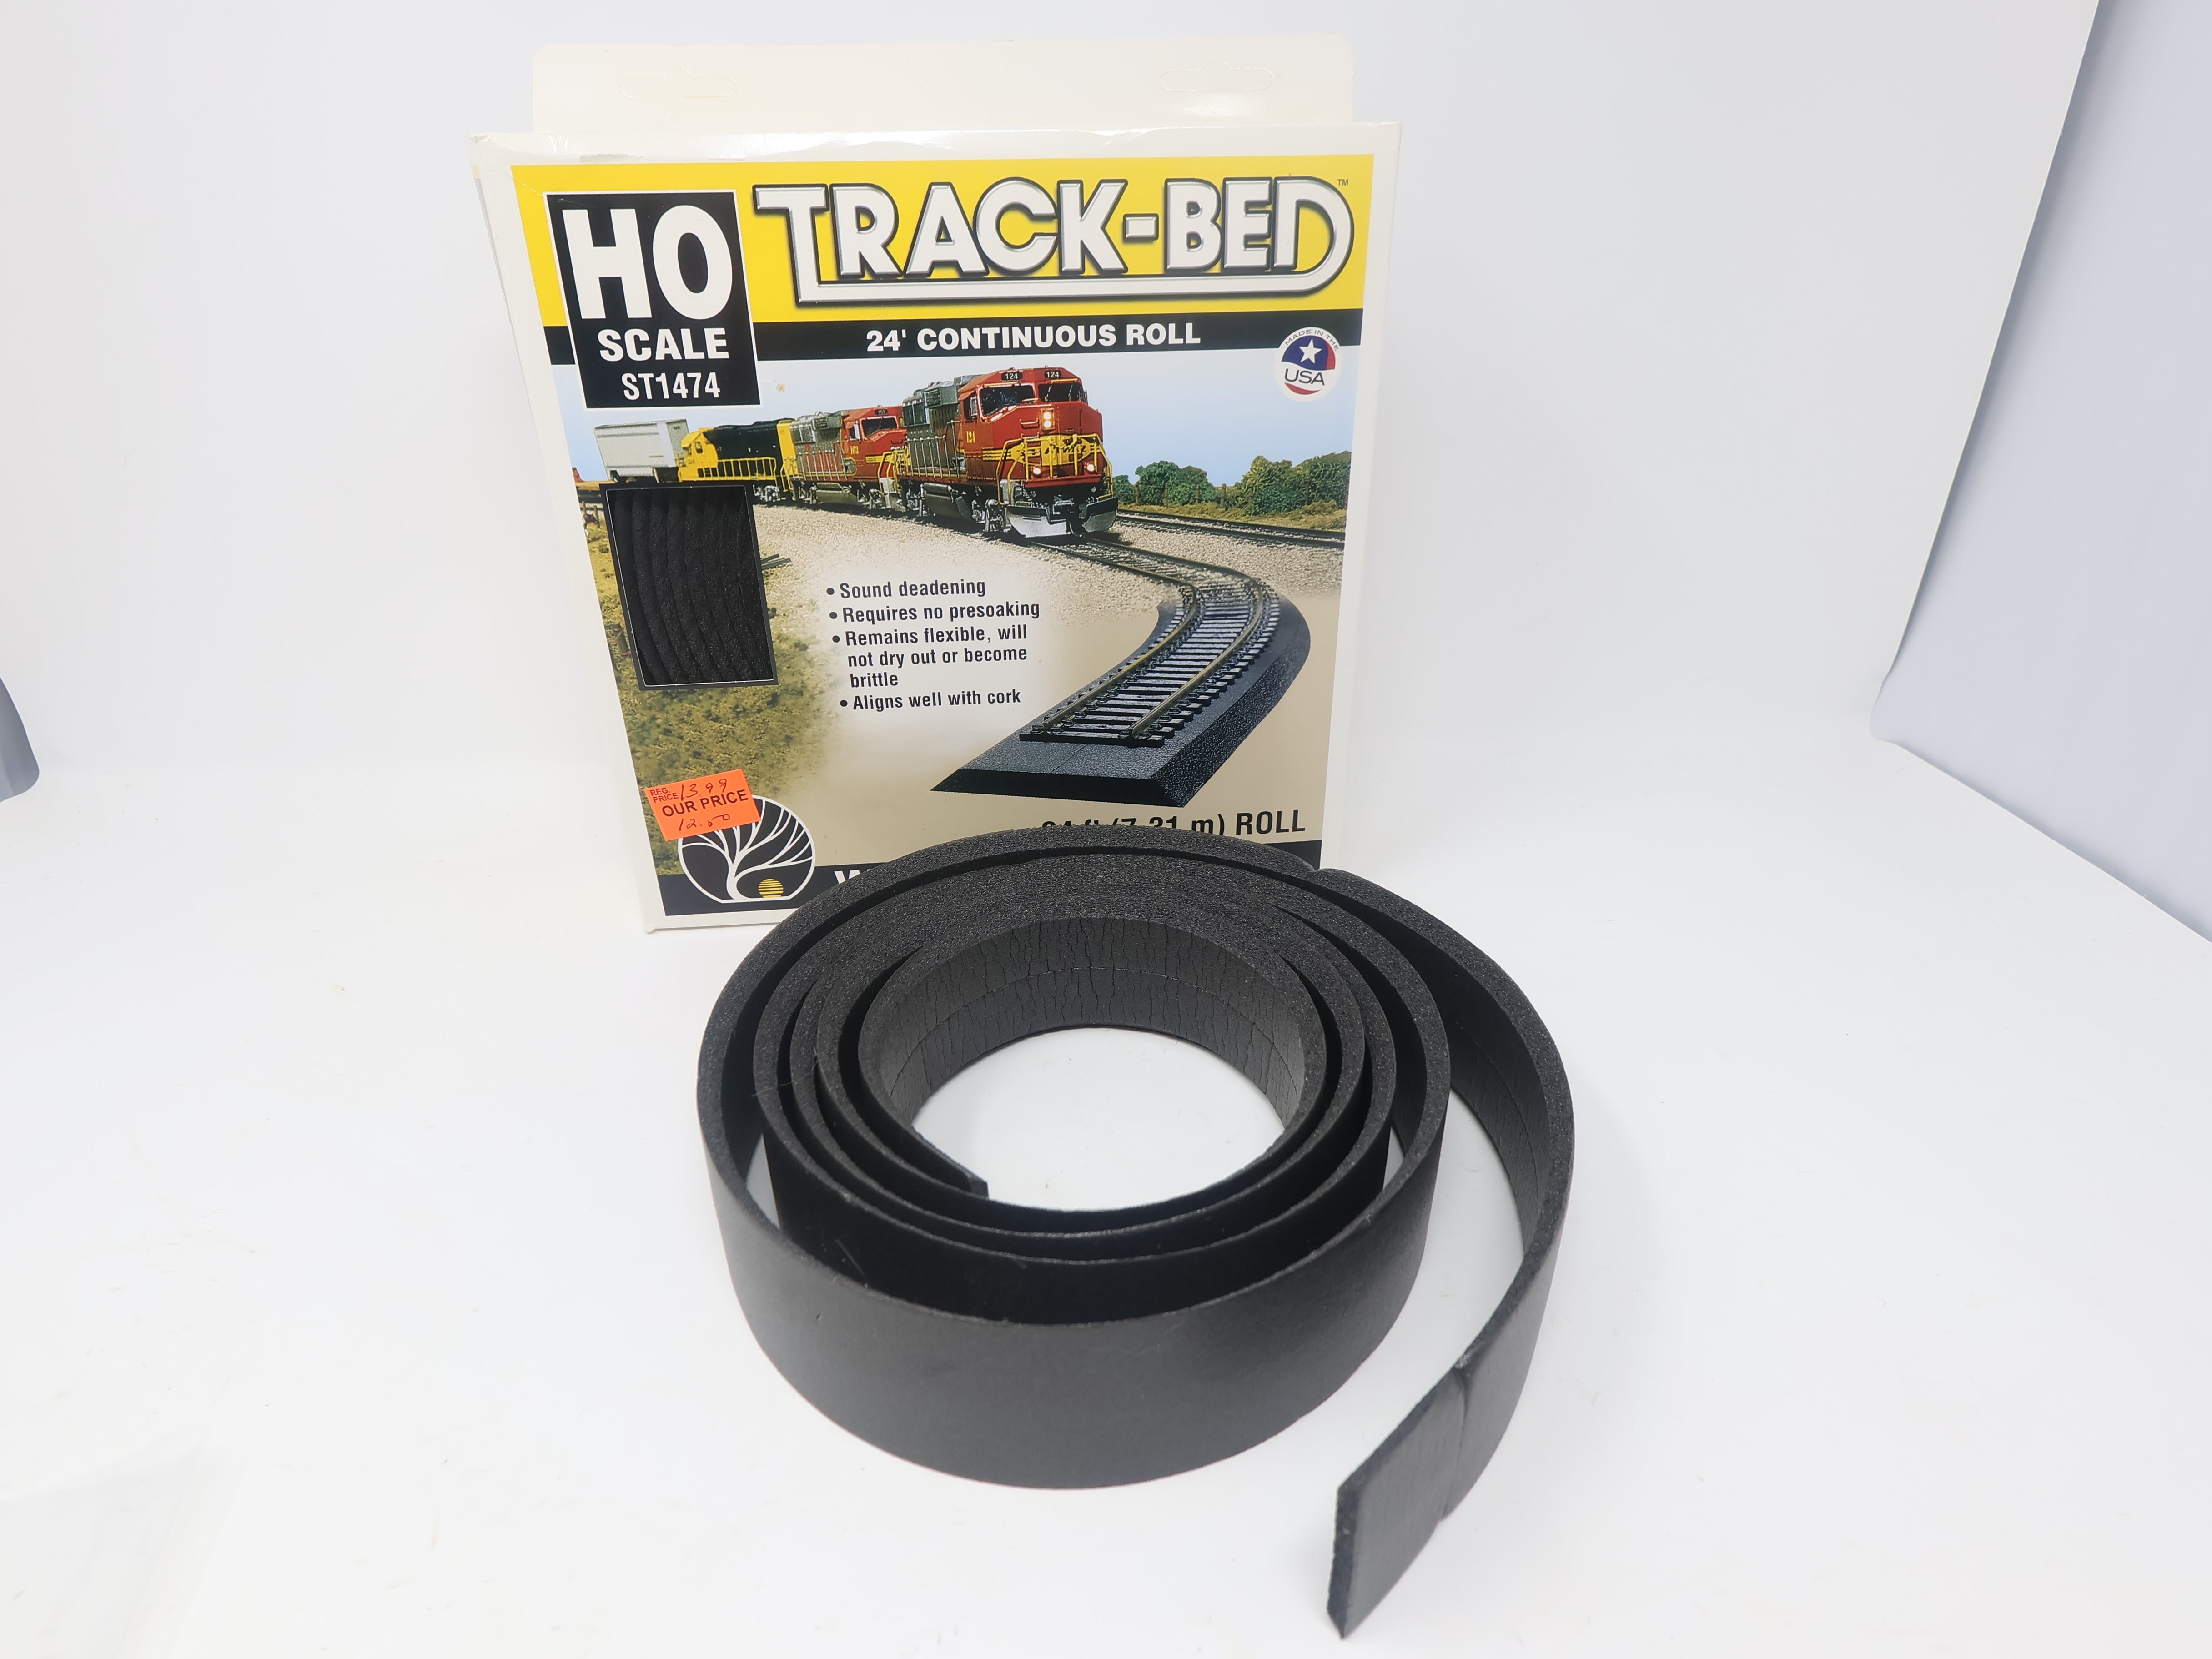 USED Woodland Scenics ST1474 HO Scale, Roll of Track-Bed